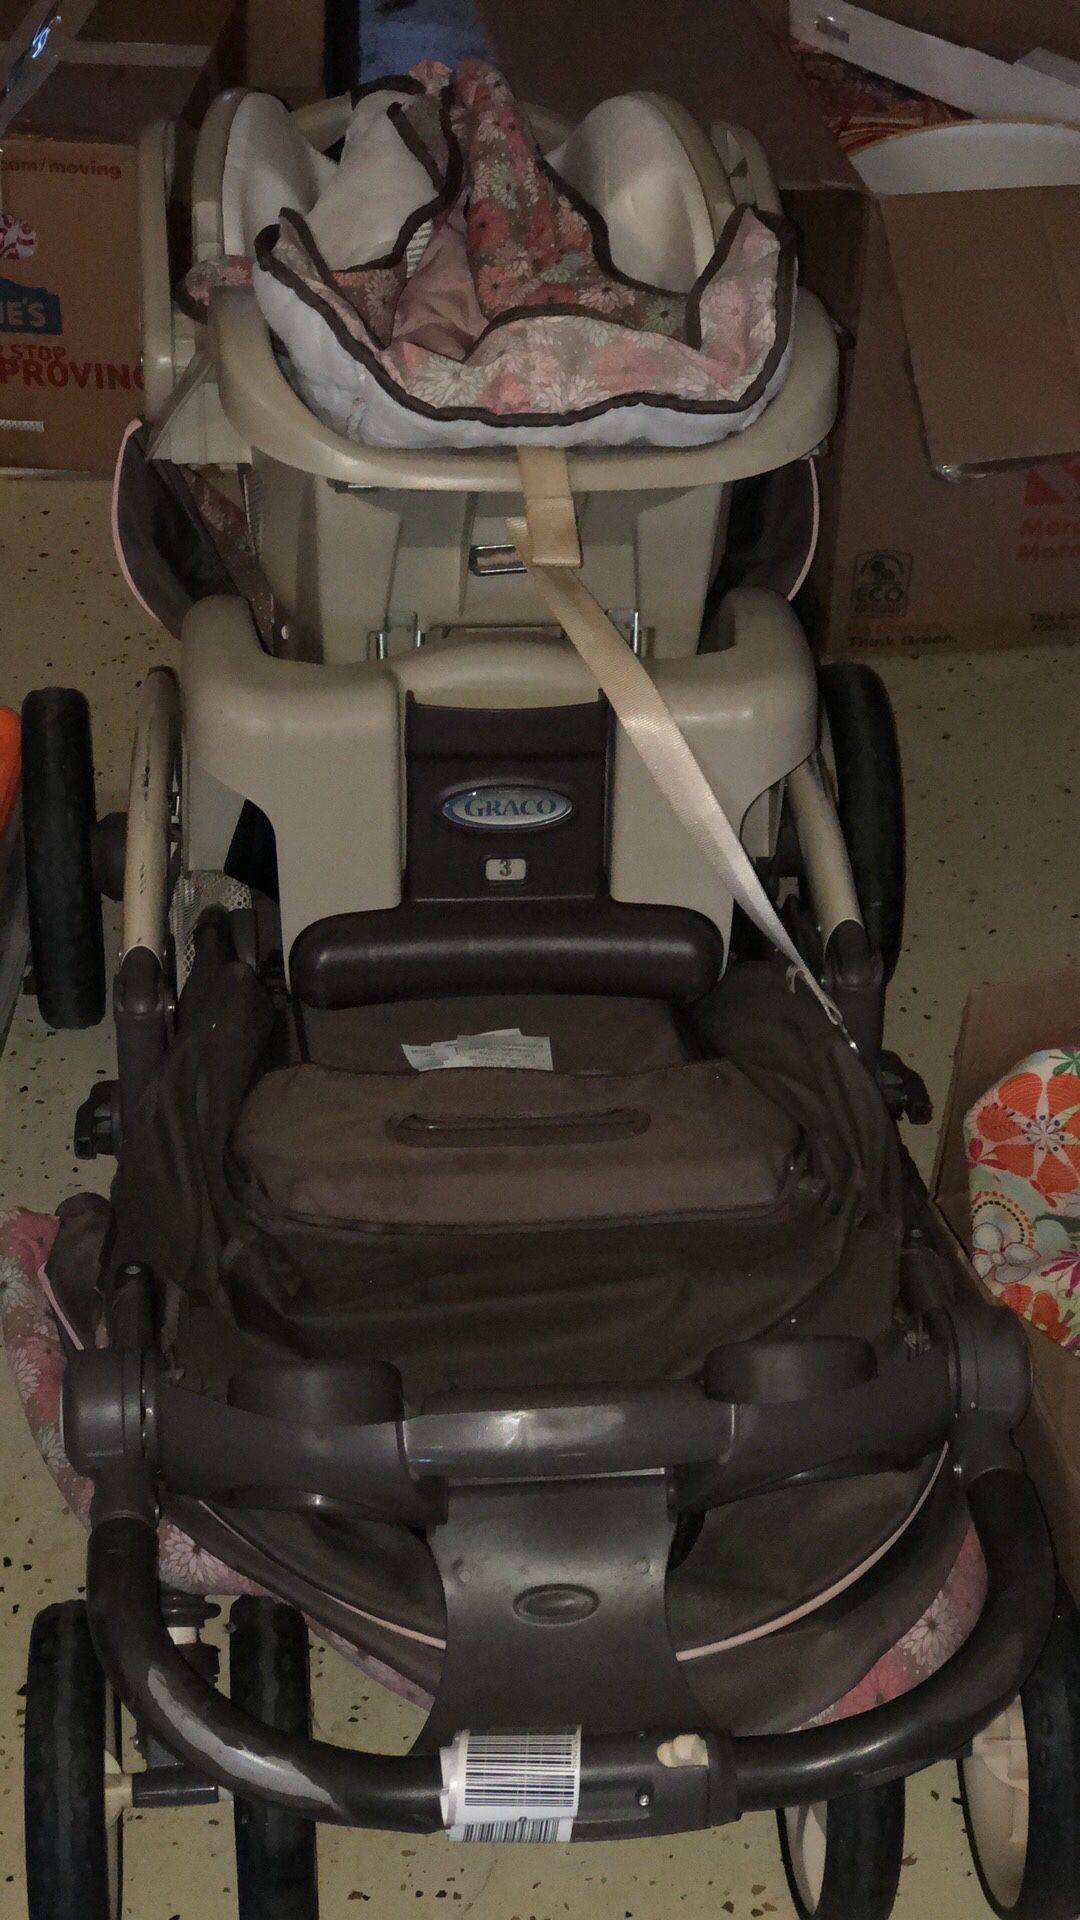 FREE stroller and car seat-as-is